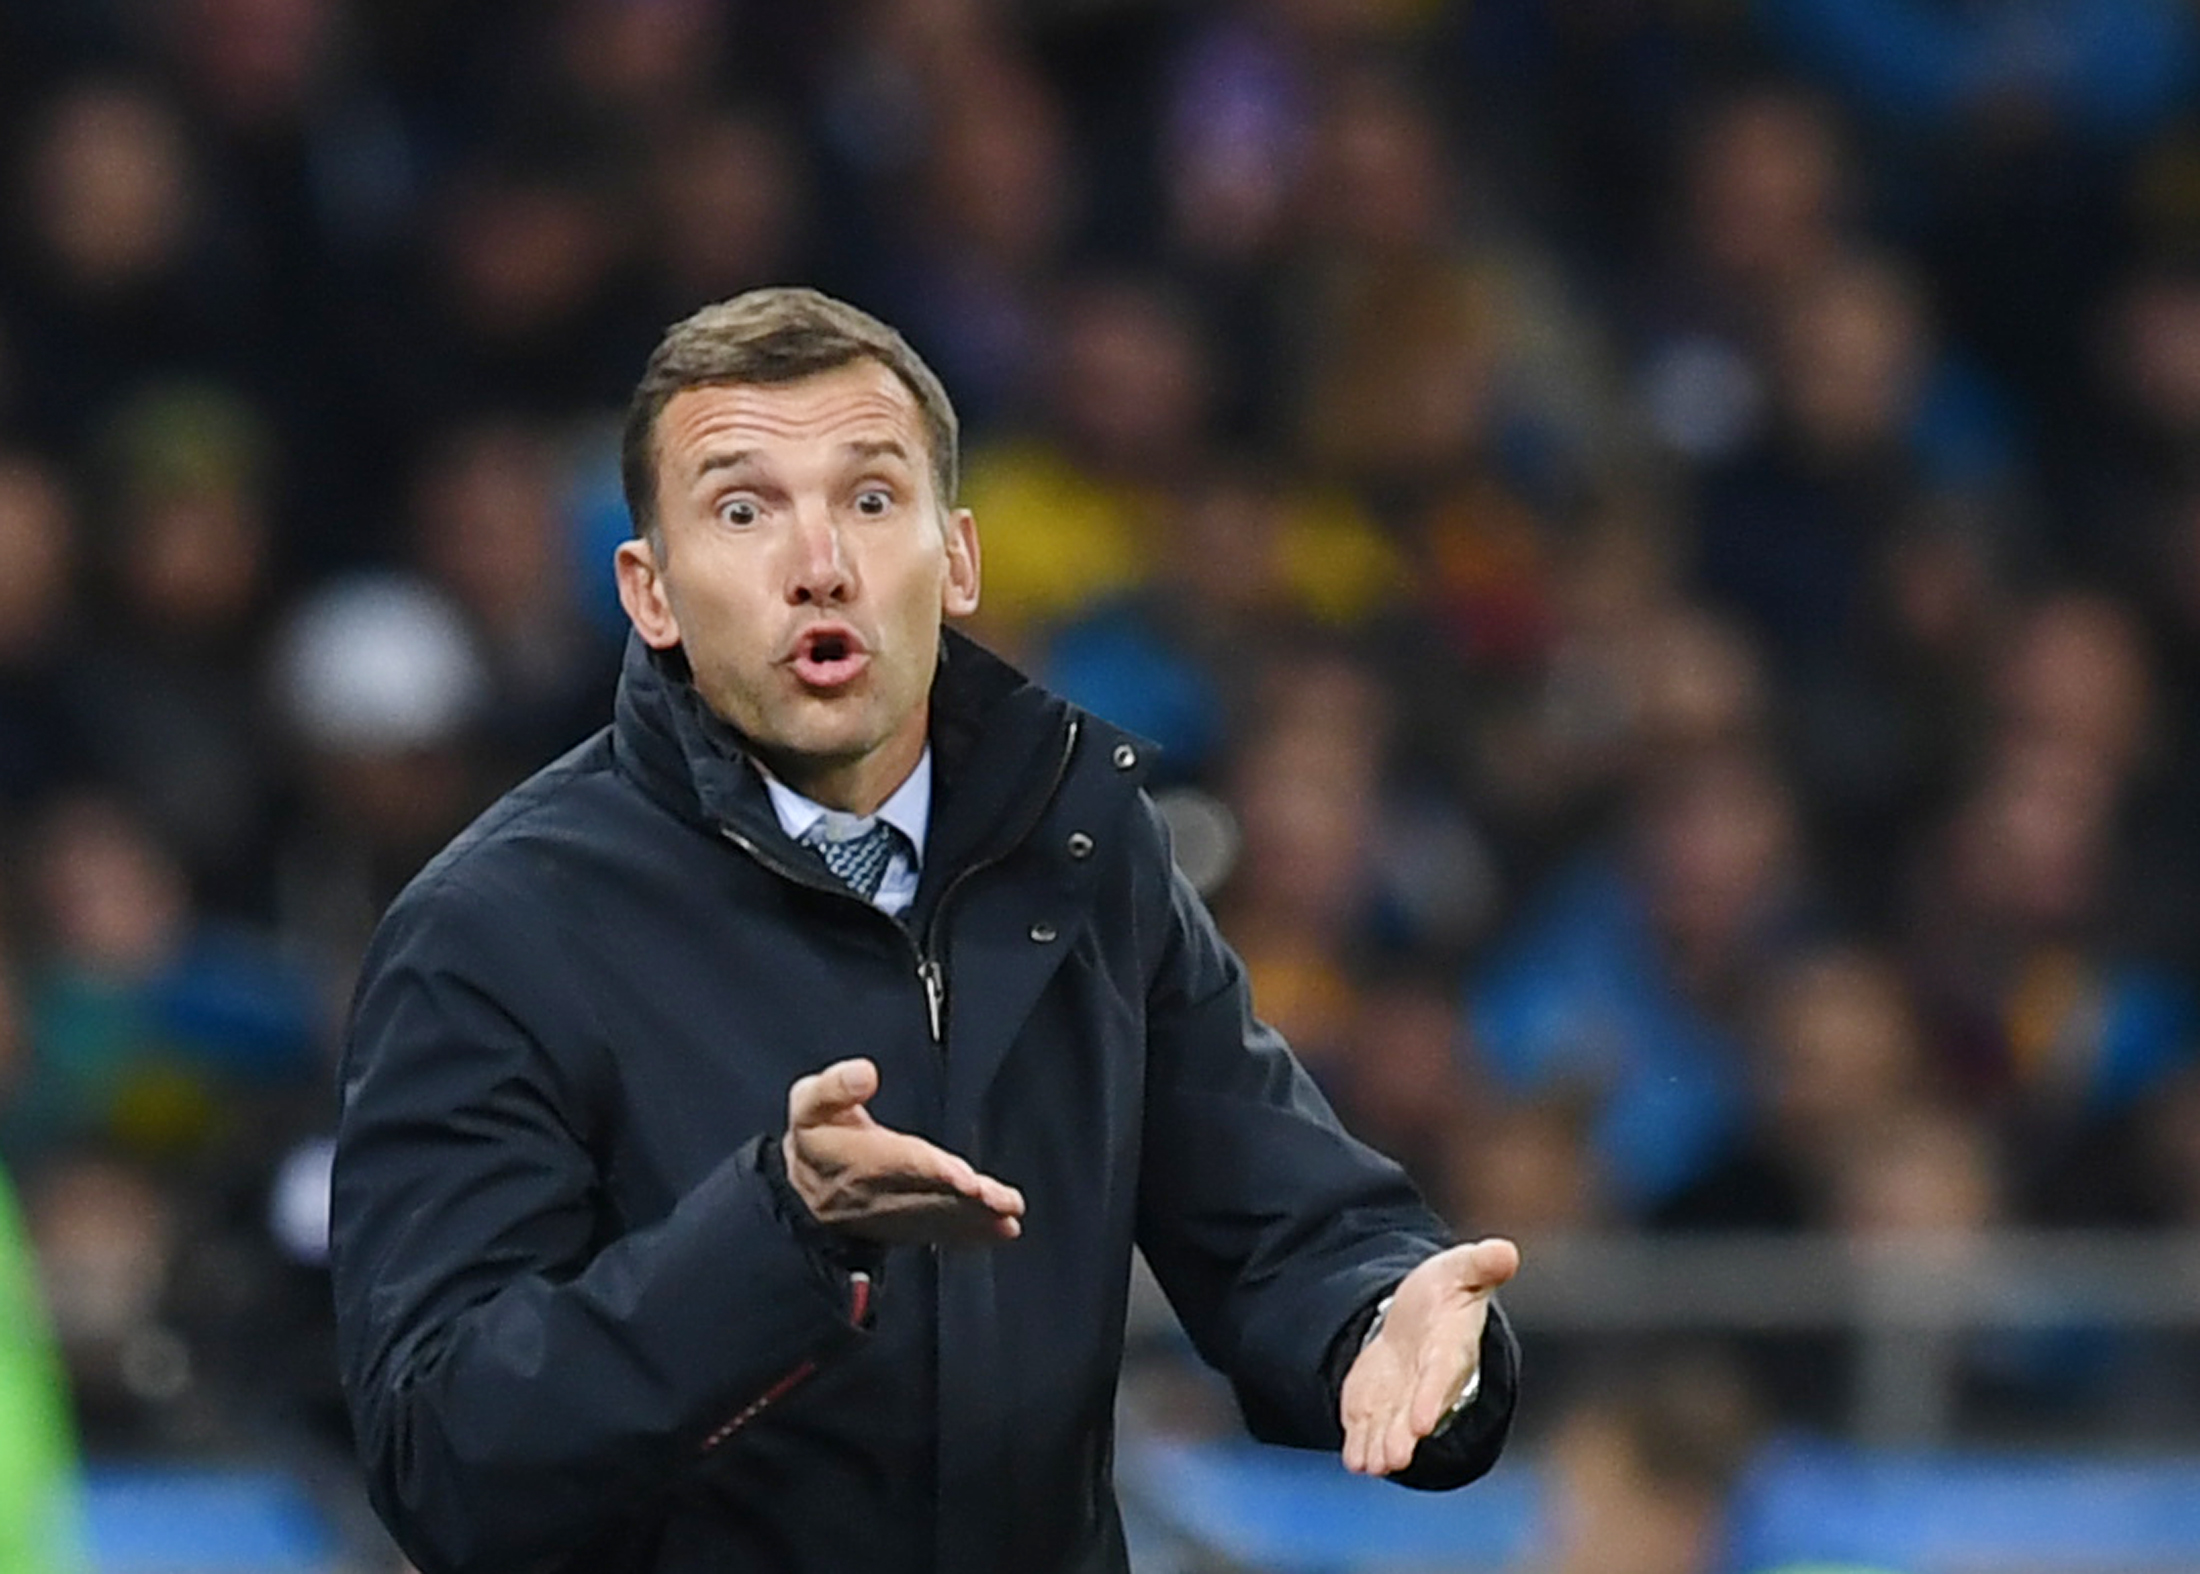 Andriy Shevchenko has to make do without a host of his experienced players. (Photo by Sergei Supinsky/AFP/Getty Images)